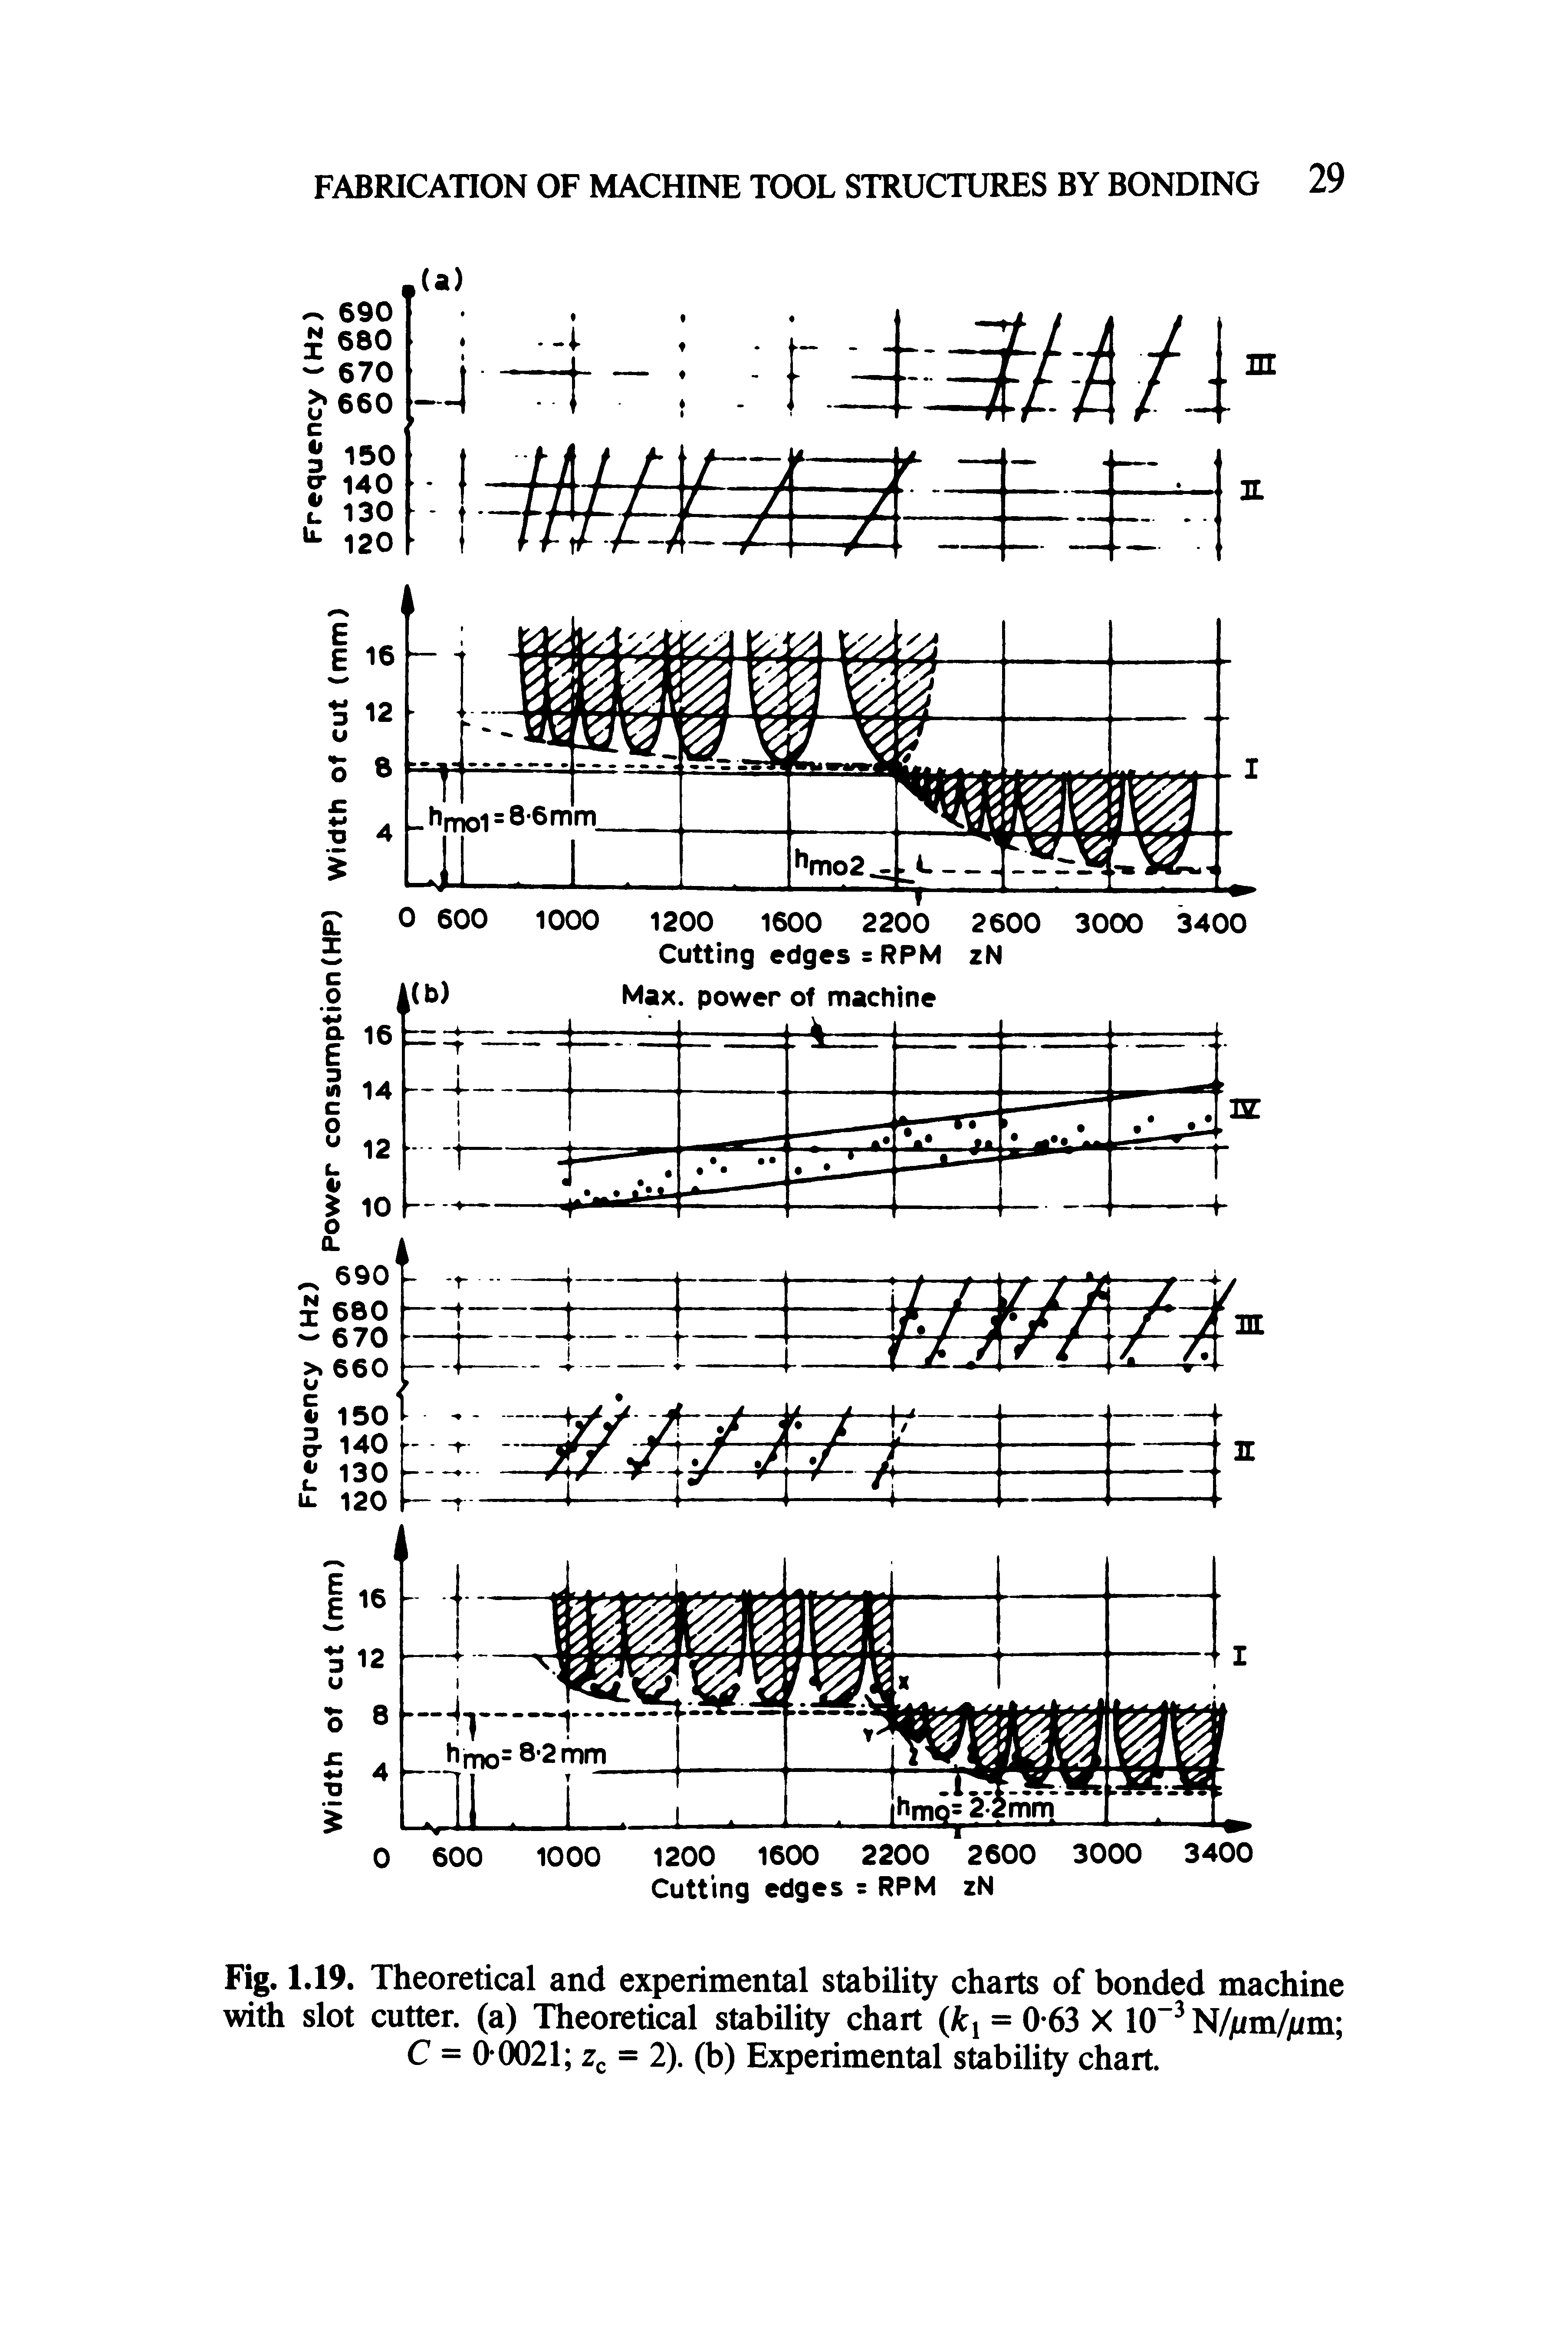 Fig. 1.19. Theoretical and experimental stability charts of bonded machine with slot cutter, (a) Theoretical stability chart = 0-63 X 10" N/jum/jum C = 0 0021 Zc = 2). (b) Experimental stability chart.